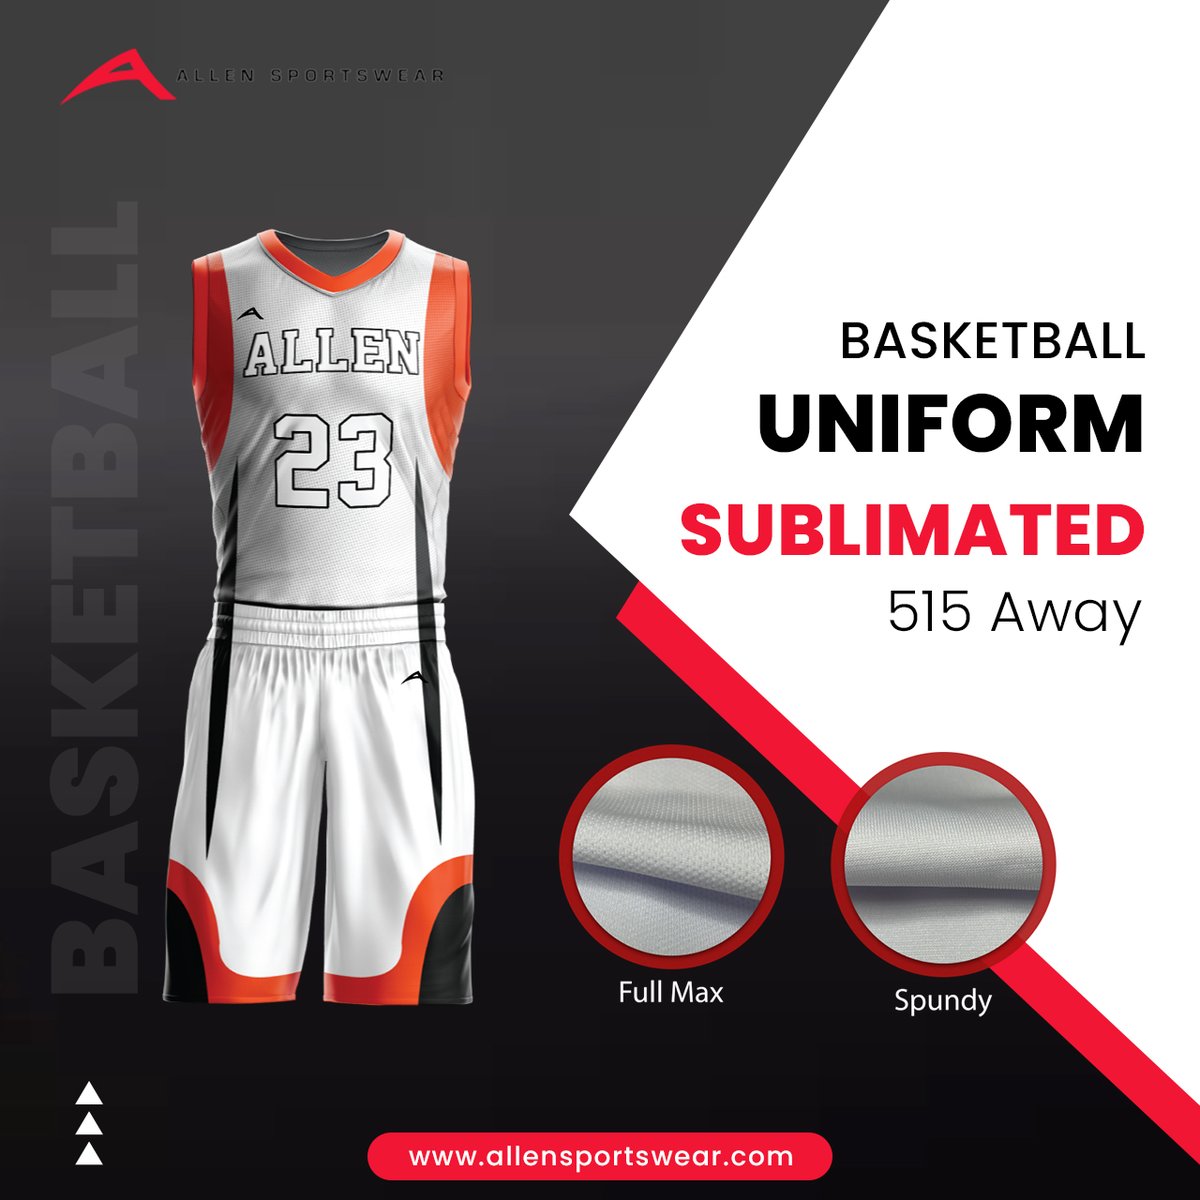 Boost your game with our Basketball Uniform Sublimated 515 Away!🏀Stand out on the court with premium design and unbeatable comfort.

👉𝐎𝐫𝐝𝐞𝐫 𝐲𝐨𝐮𝐫𝐬 𝐧𝐨𝐰!

#basketballuniform #custombasketballuniform #customizeuniforms #sportsfashion #sportsstyle #playinstyle